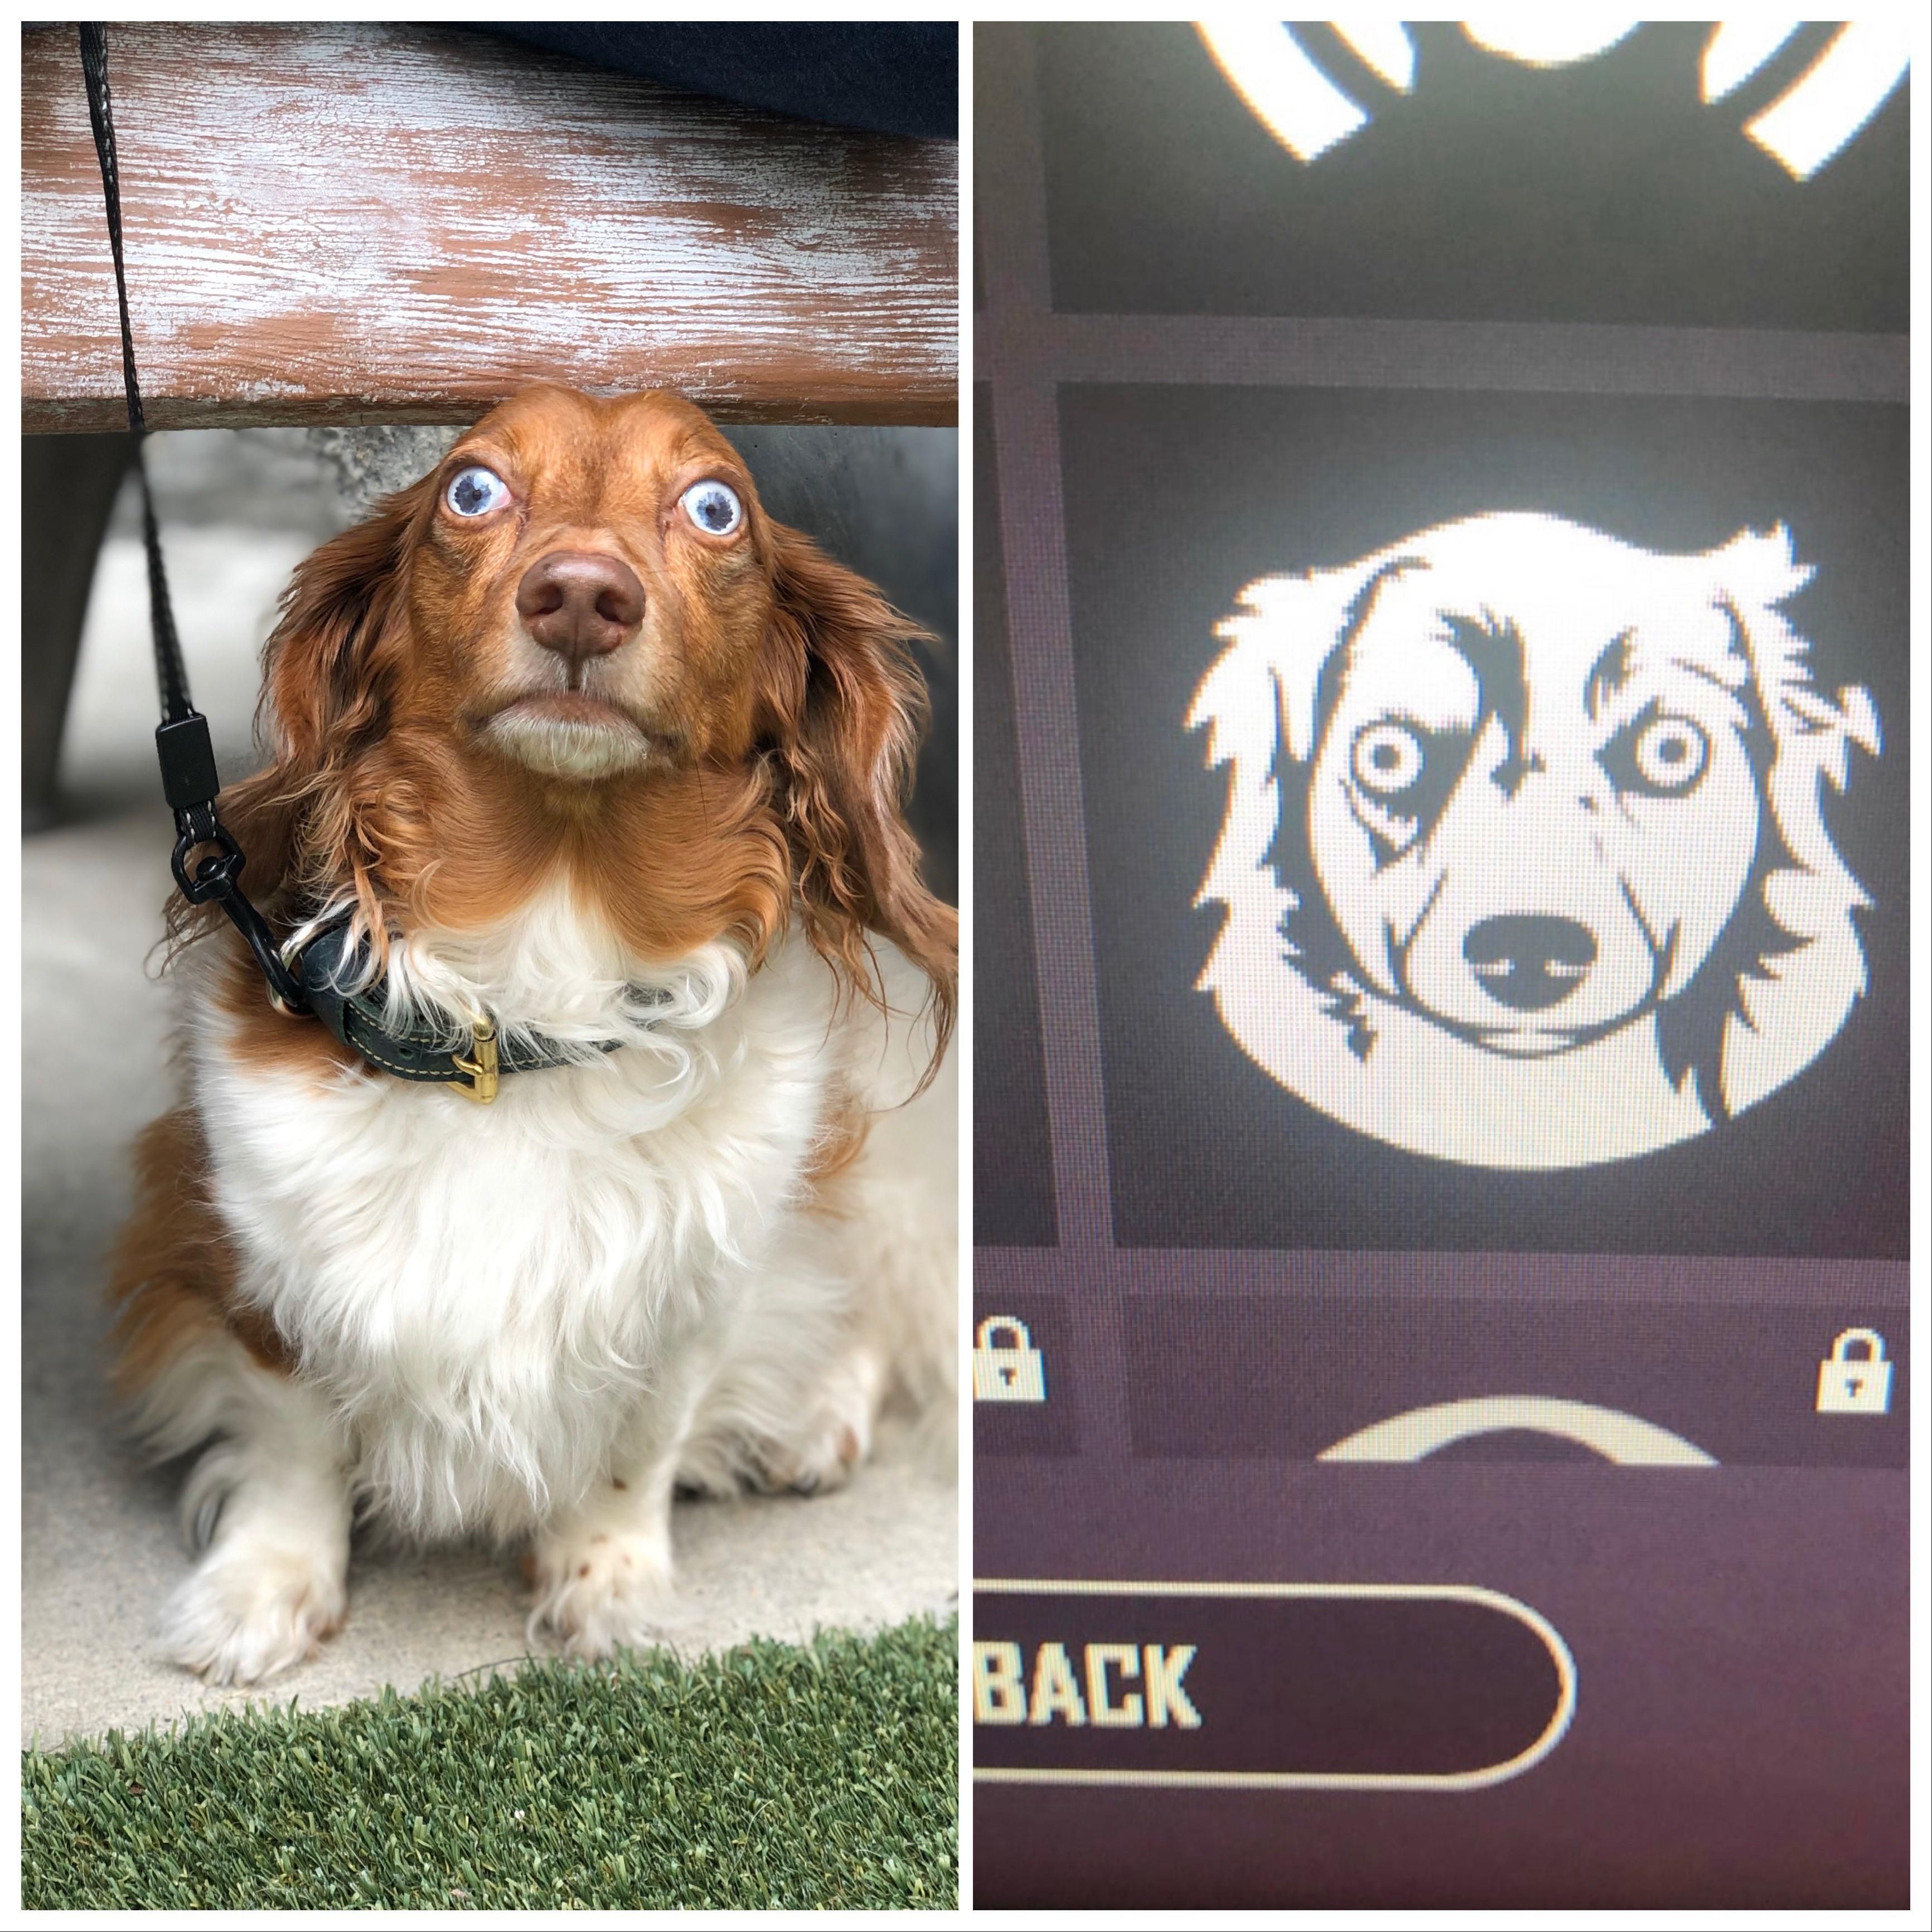 PUBG is using my dogs likeness in their video games